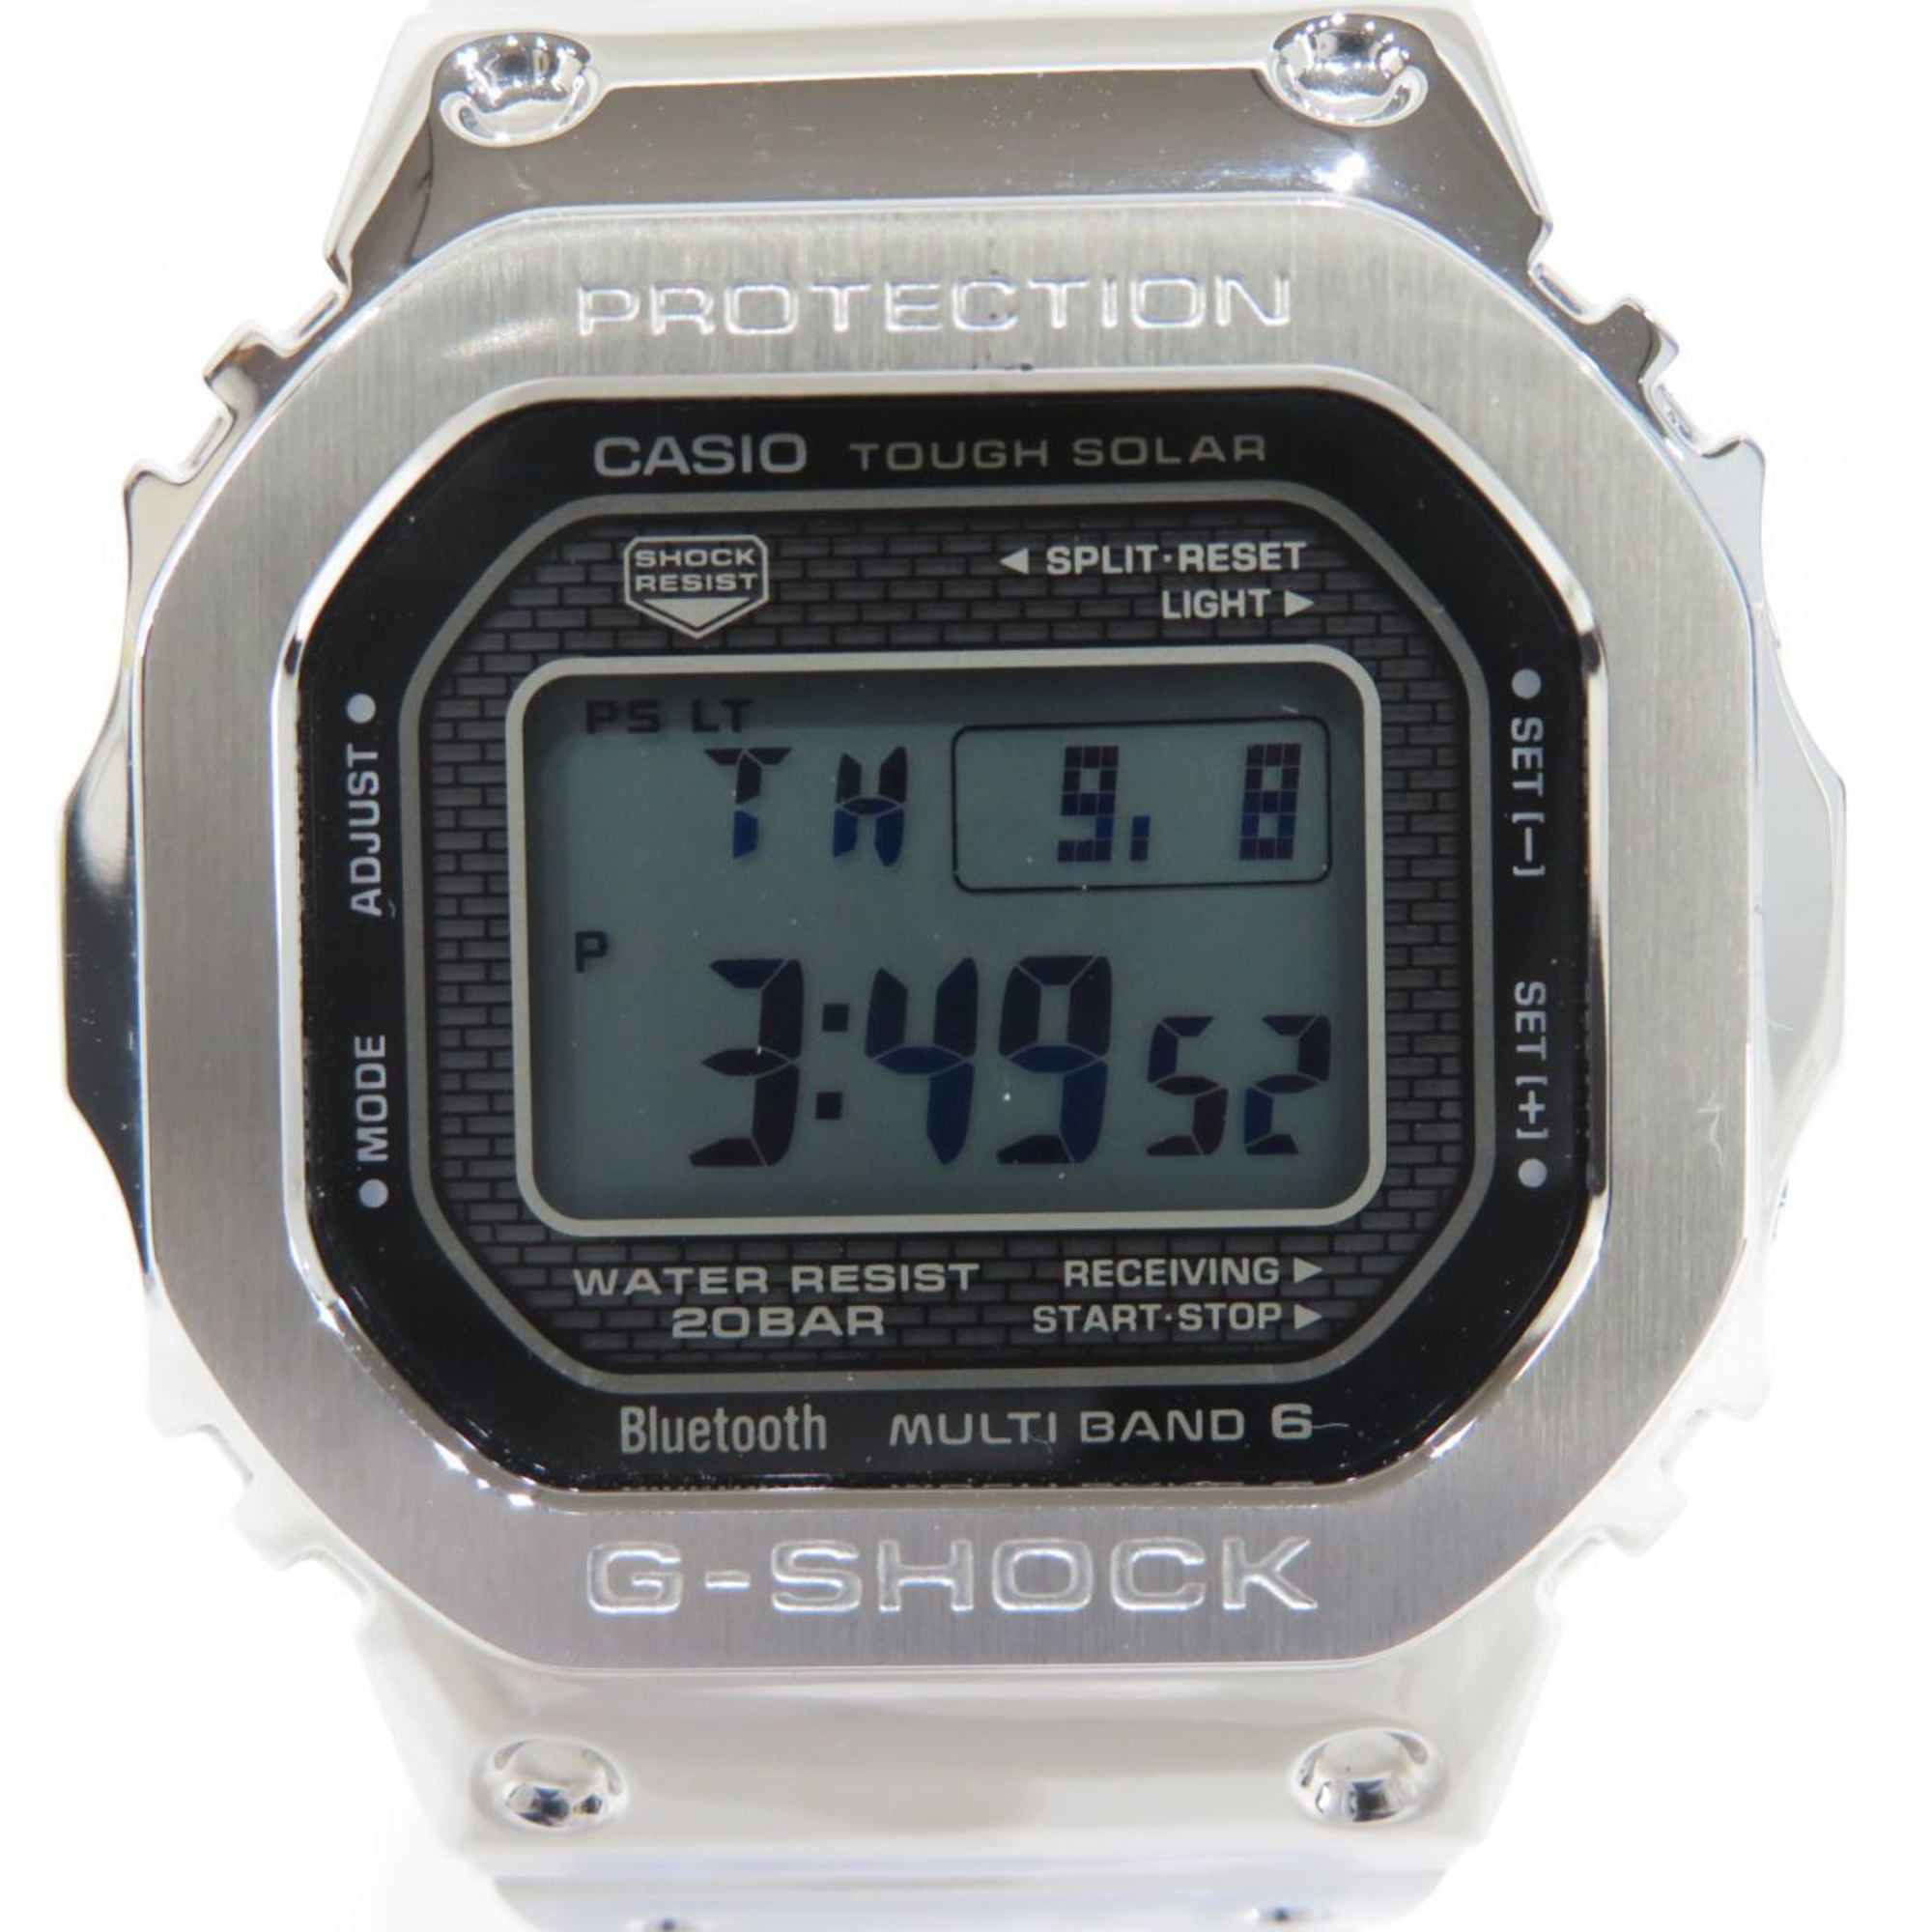 Authenticated Used CASIO Casio G-SHOCK full metal GMW-B5000D-1JF